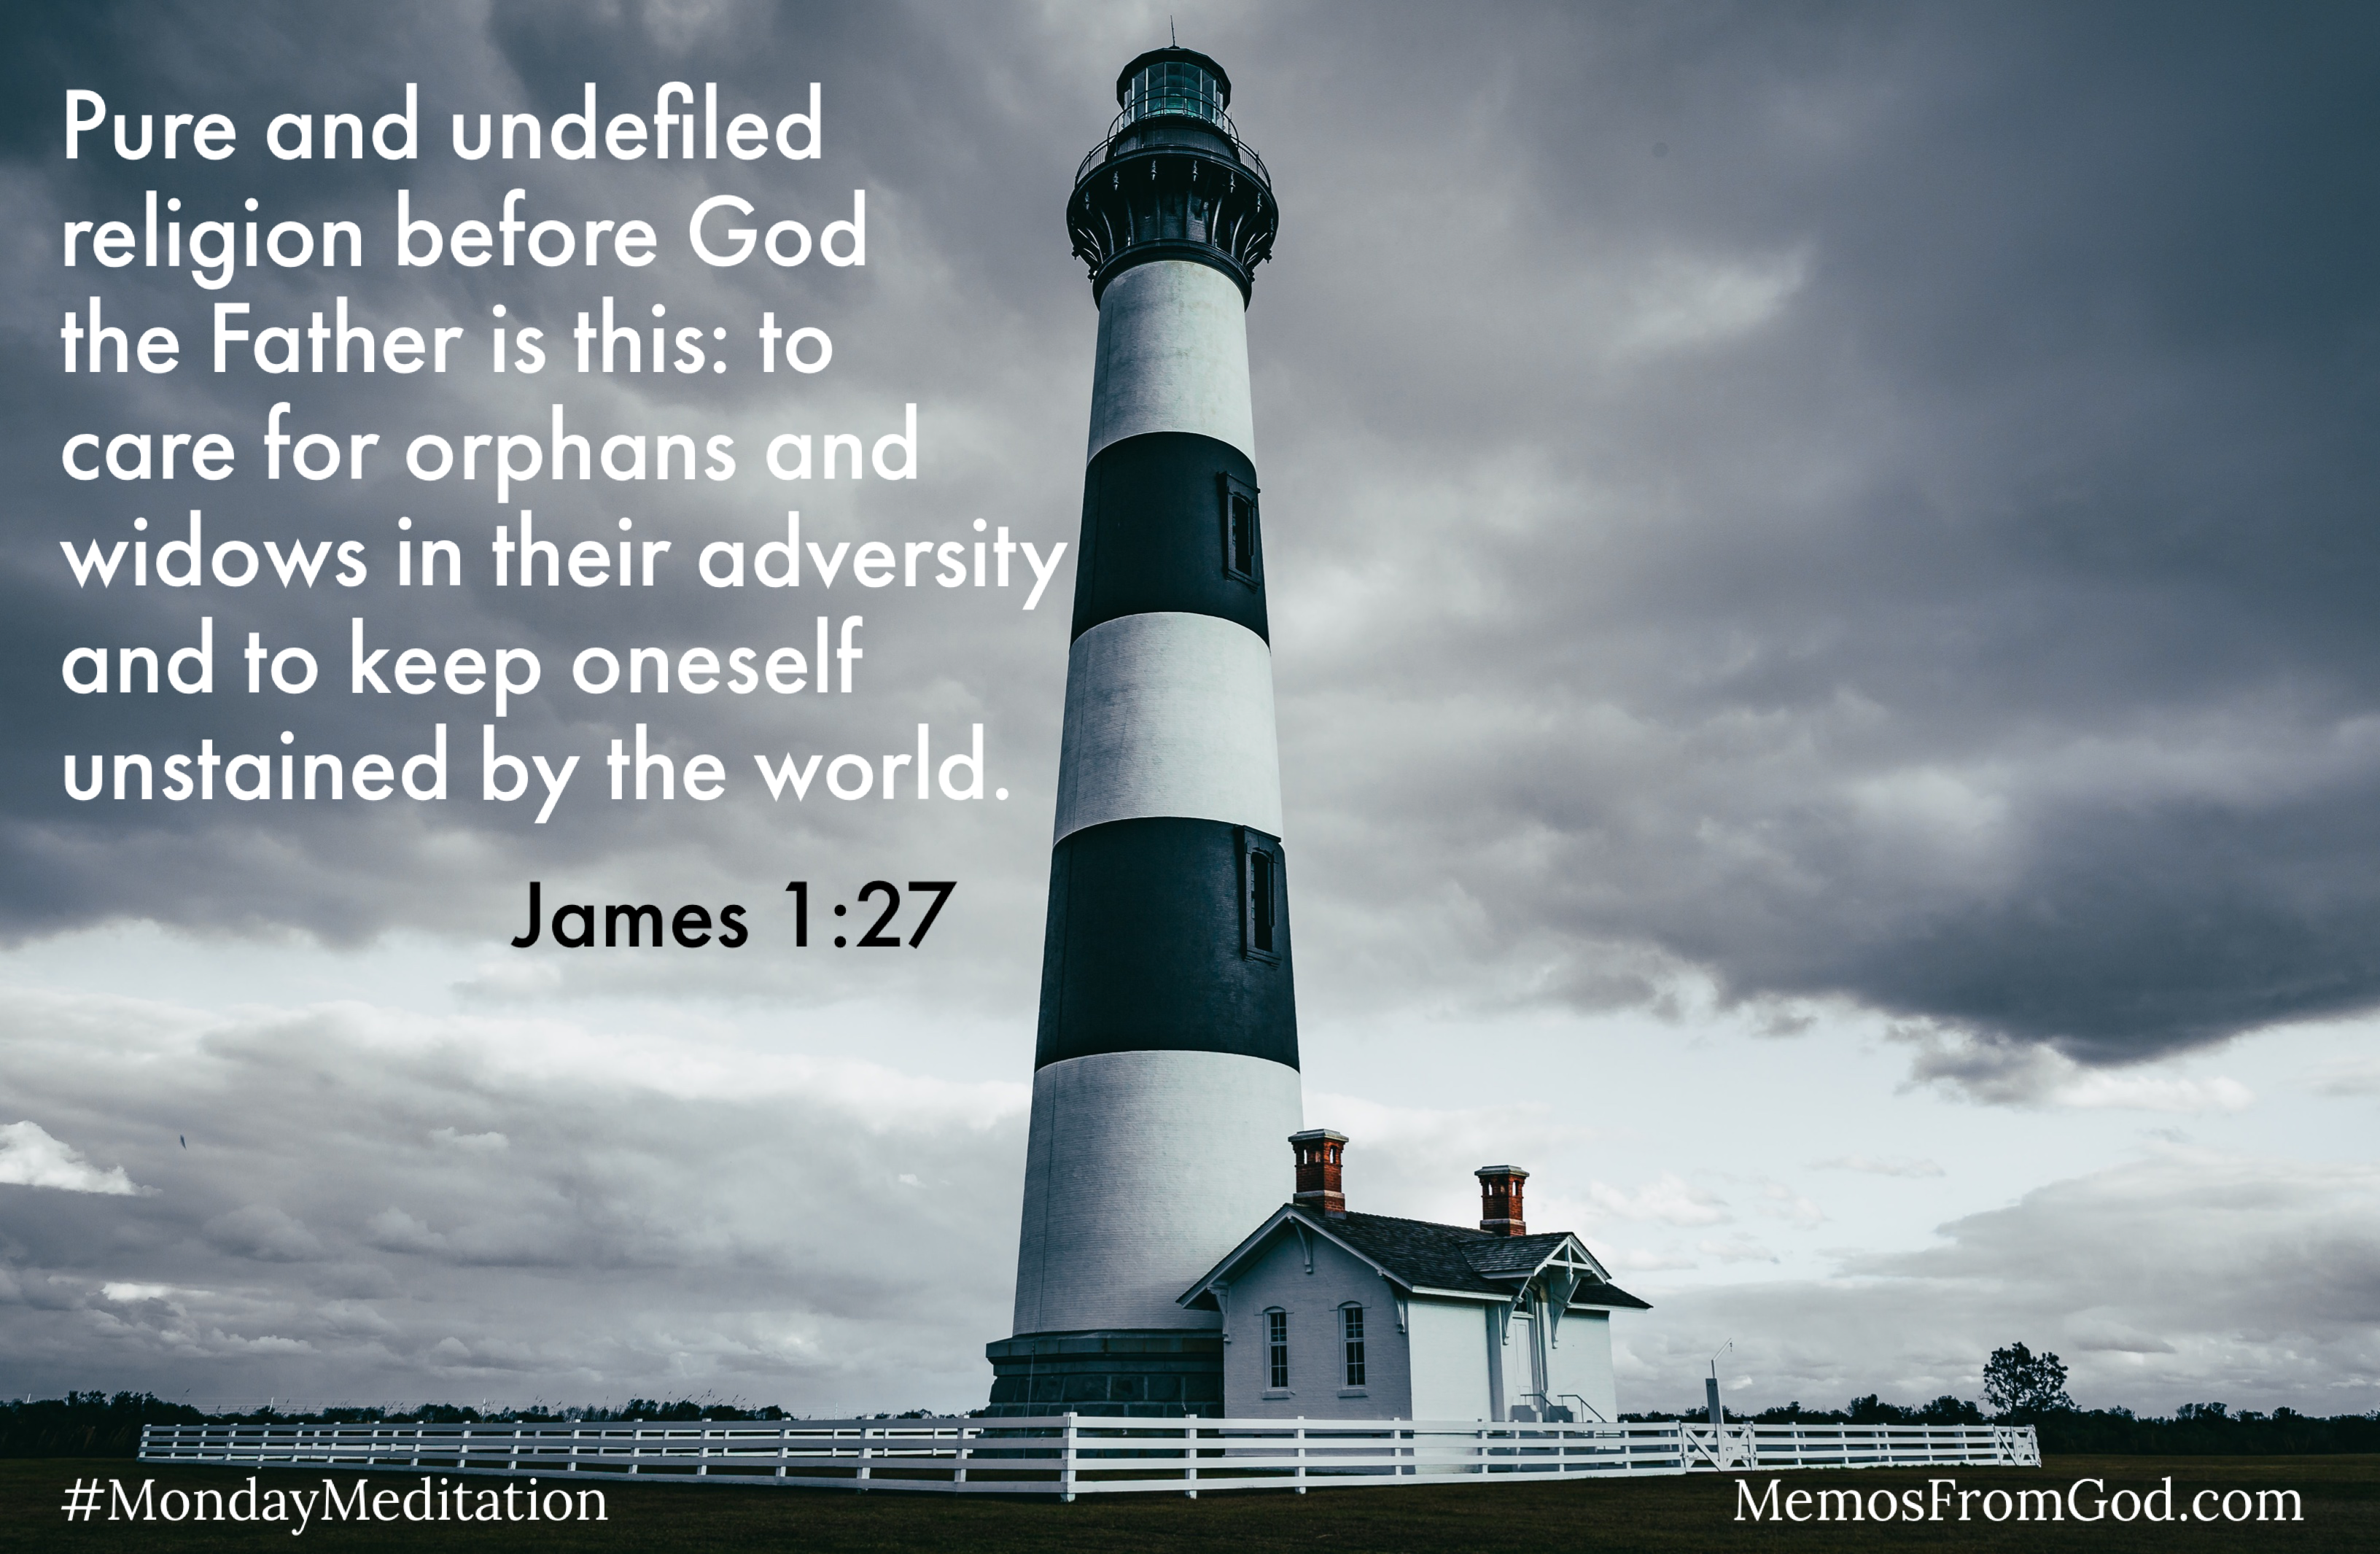 A black and white photo of a black and white striped lighthouse under a stormy sky. Caption: Pure and undefiled religion before God the Father is this: to care for orphans and widows in their adversity and to keep oneself unstained by the world. James 1:27